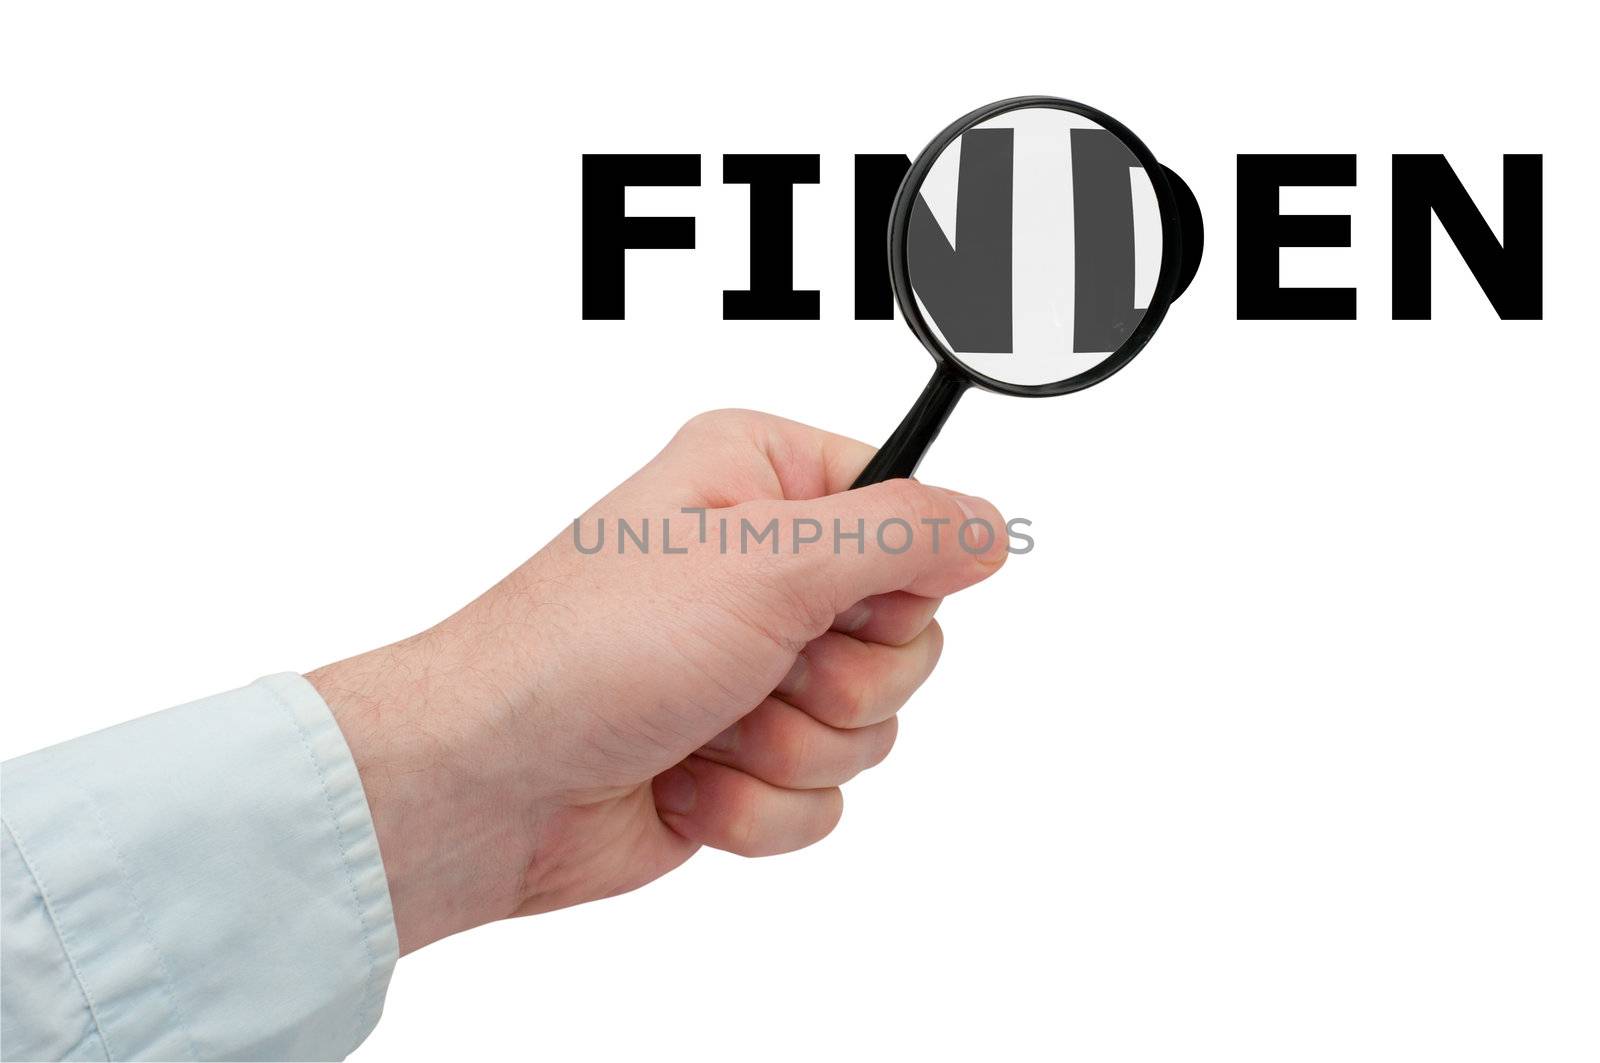 Searching - Man's Hand Holding Magnifying Glass and Search / Finden Sign - German Version 